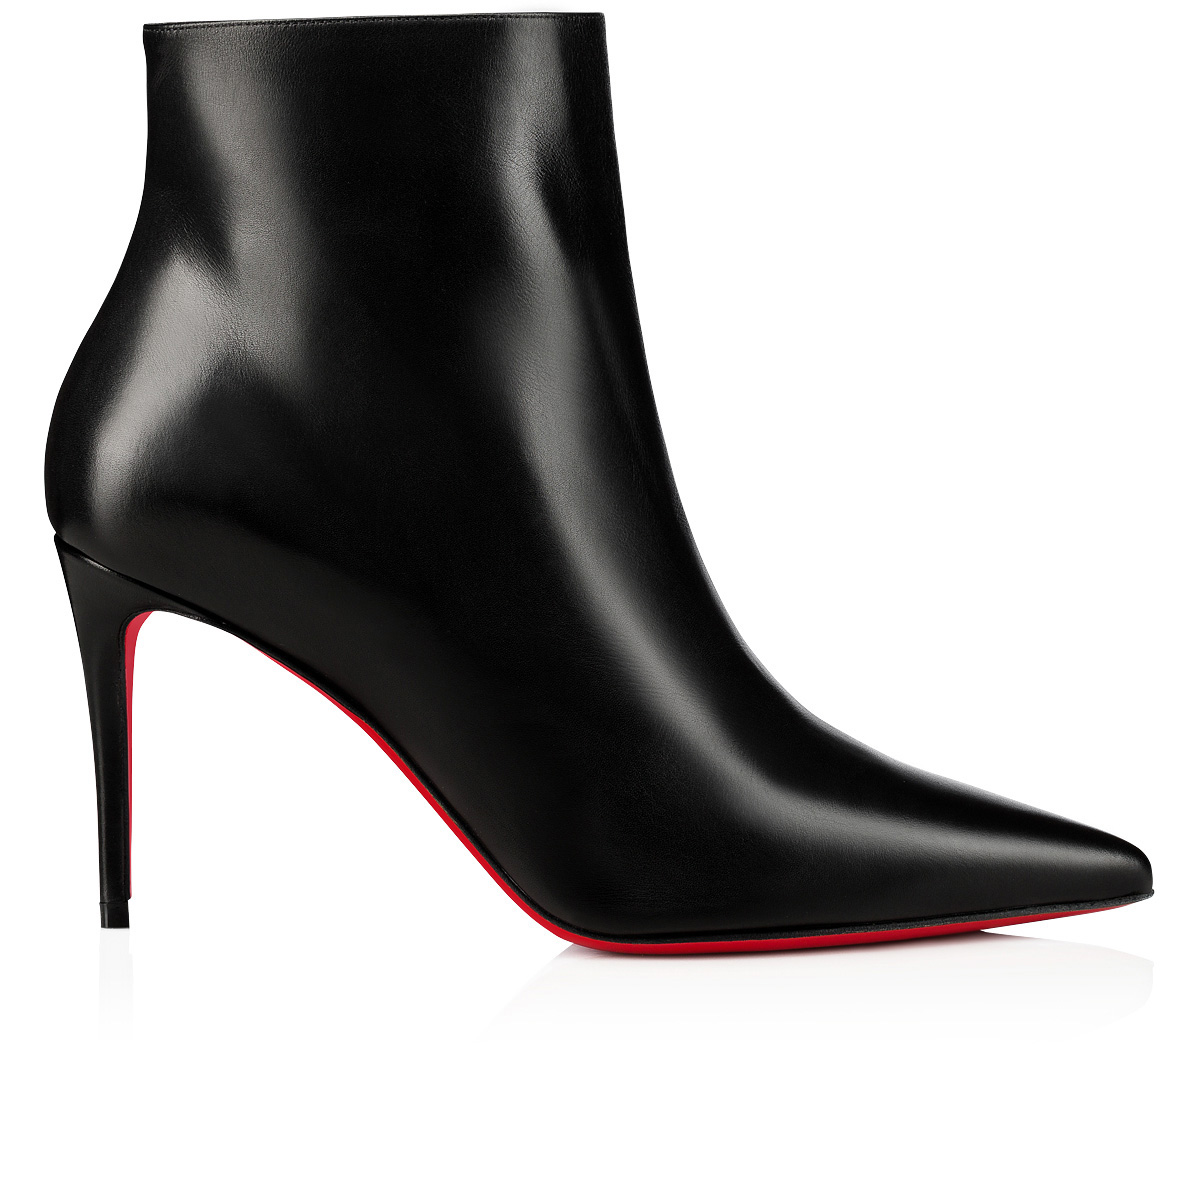 So Kate Booty - 85 mm Ankle boots - Calf leather - Black